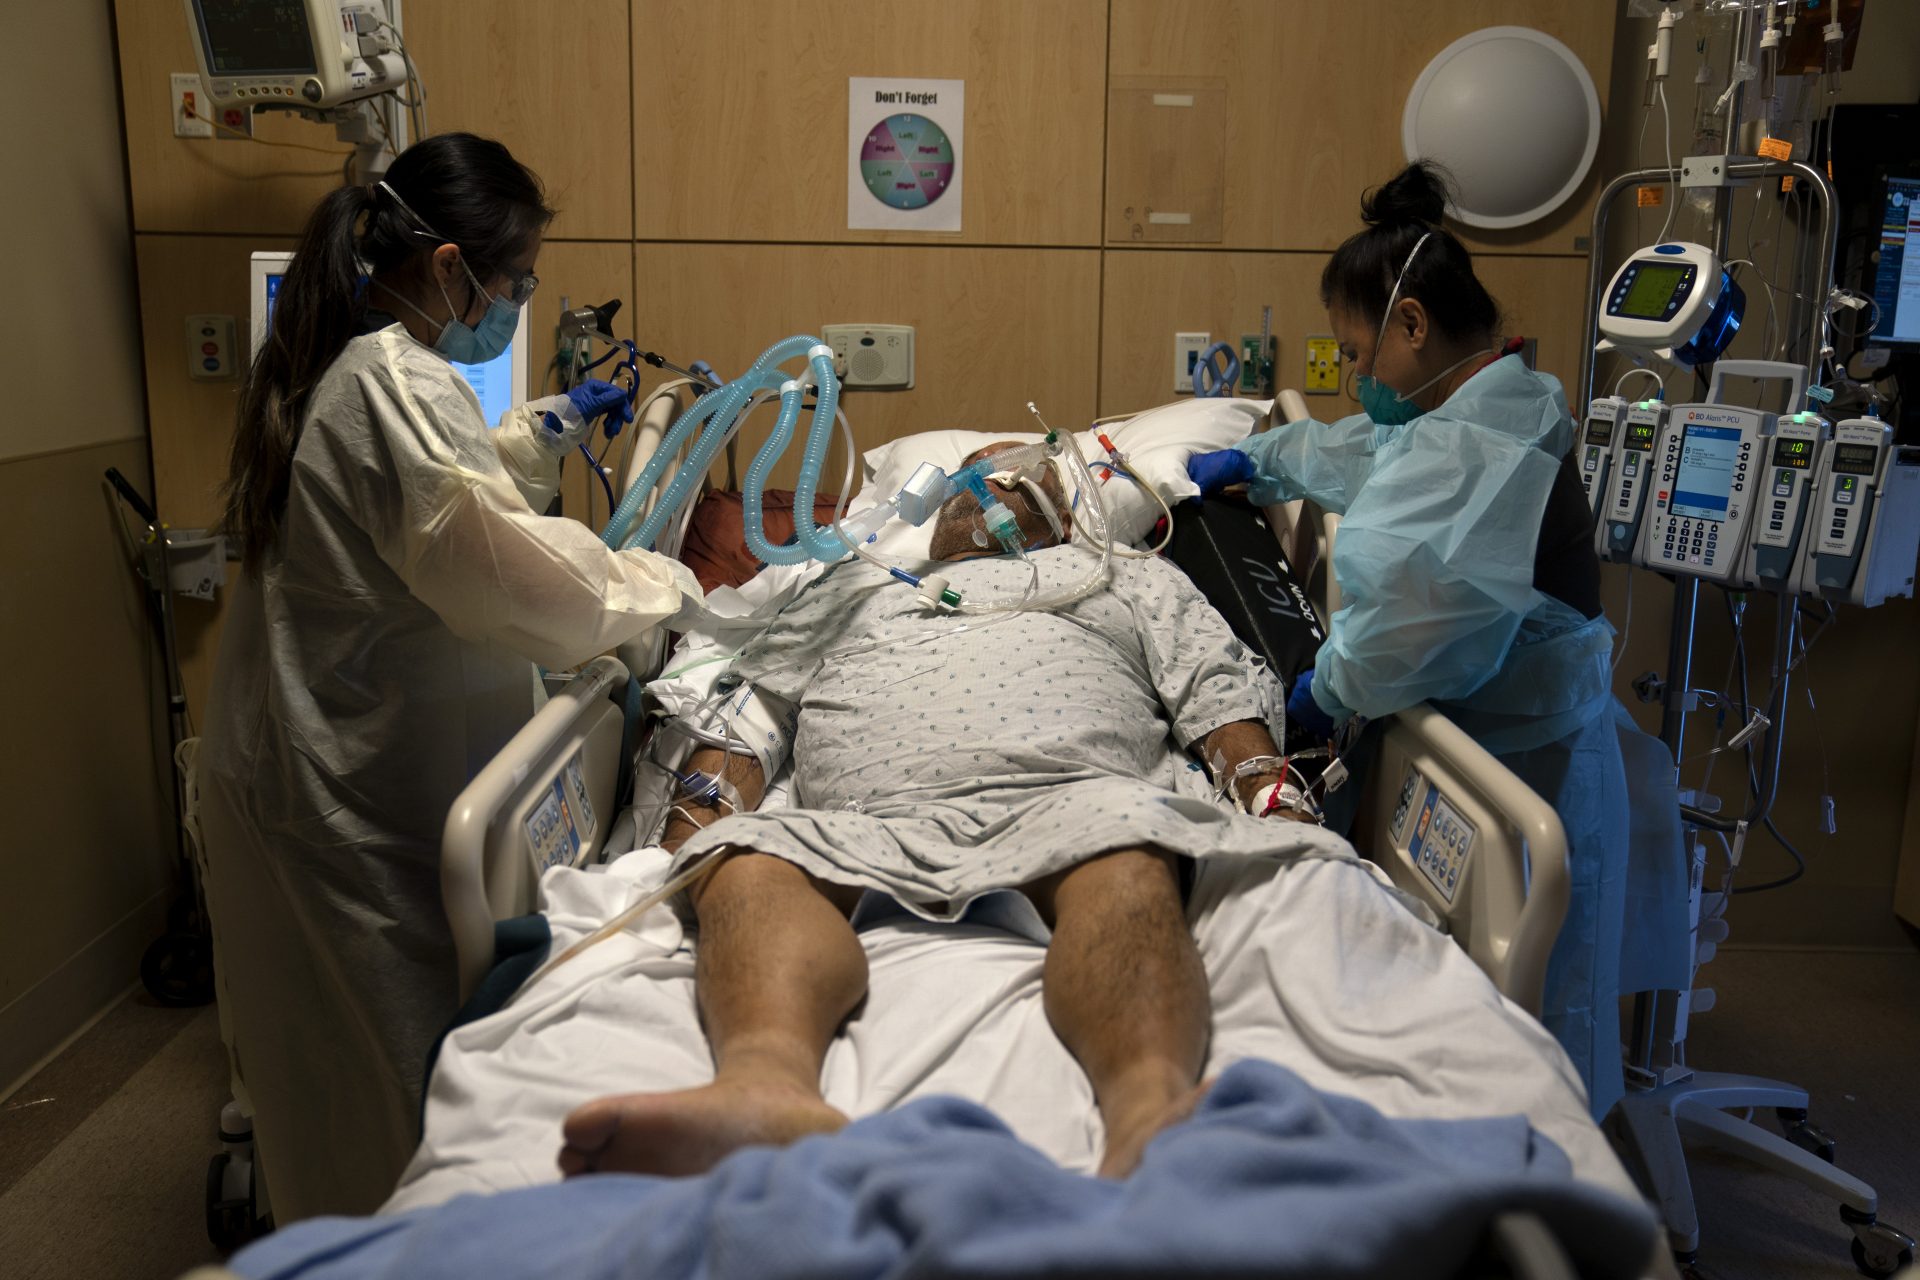 Registered nurses Karen Ross, right, and Angela Nguyen assist a COVID-19 patient at Providence Holy Cross Medical Center in the Mission Hills section of Los Angeles, Thursday, Nov. 19, 2020. 